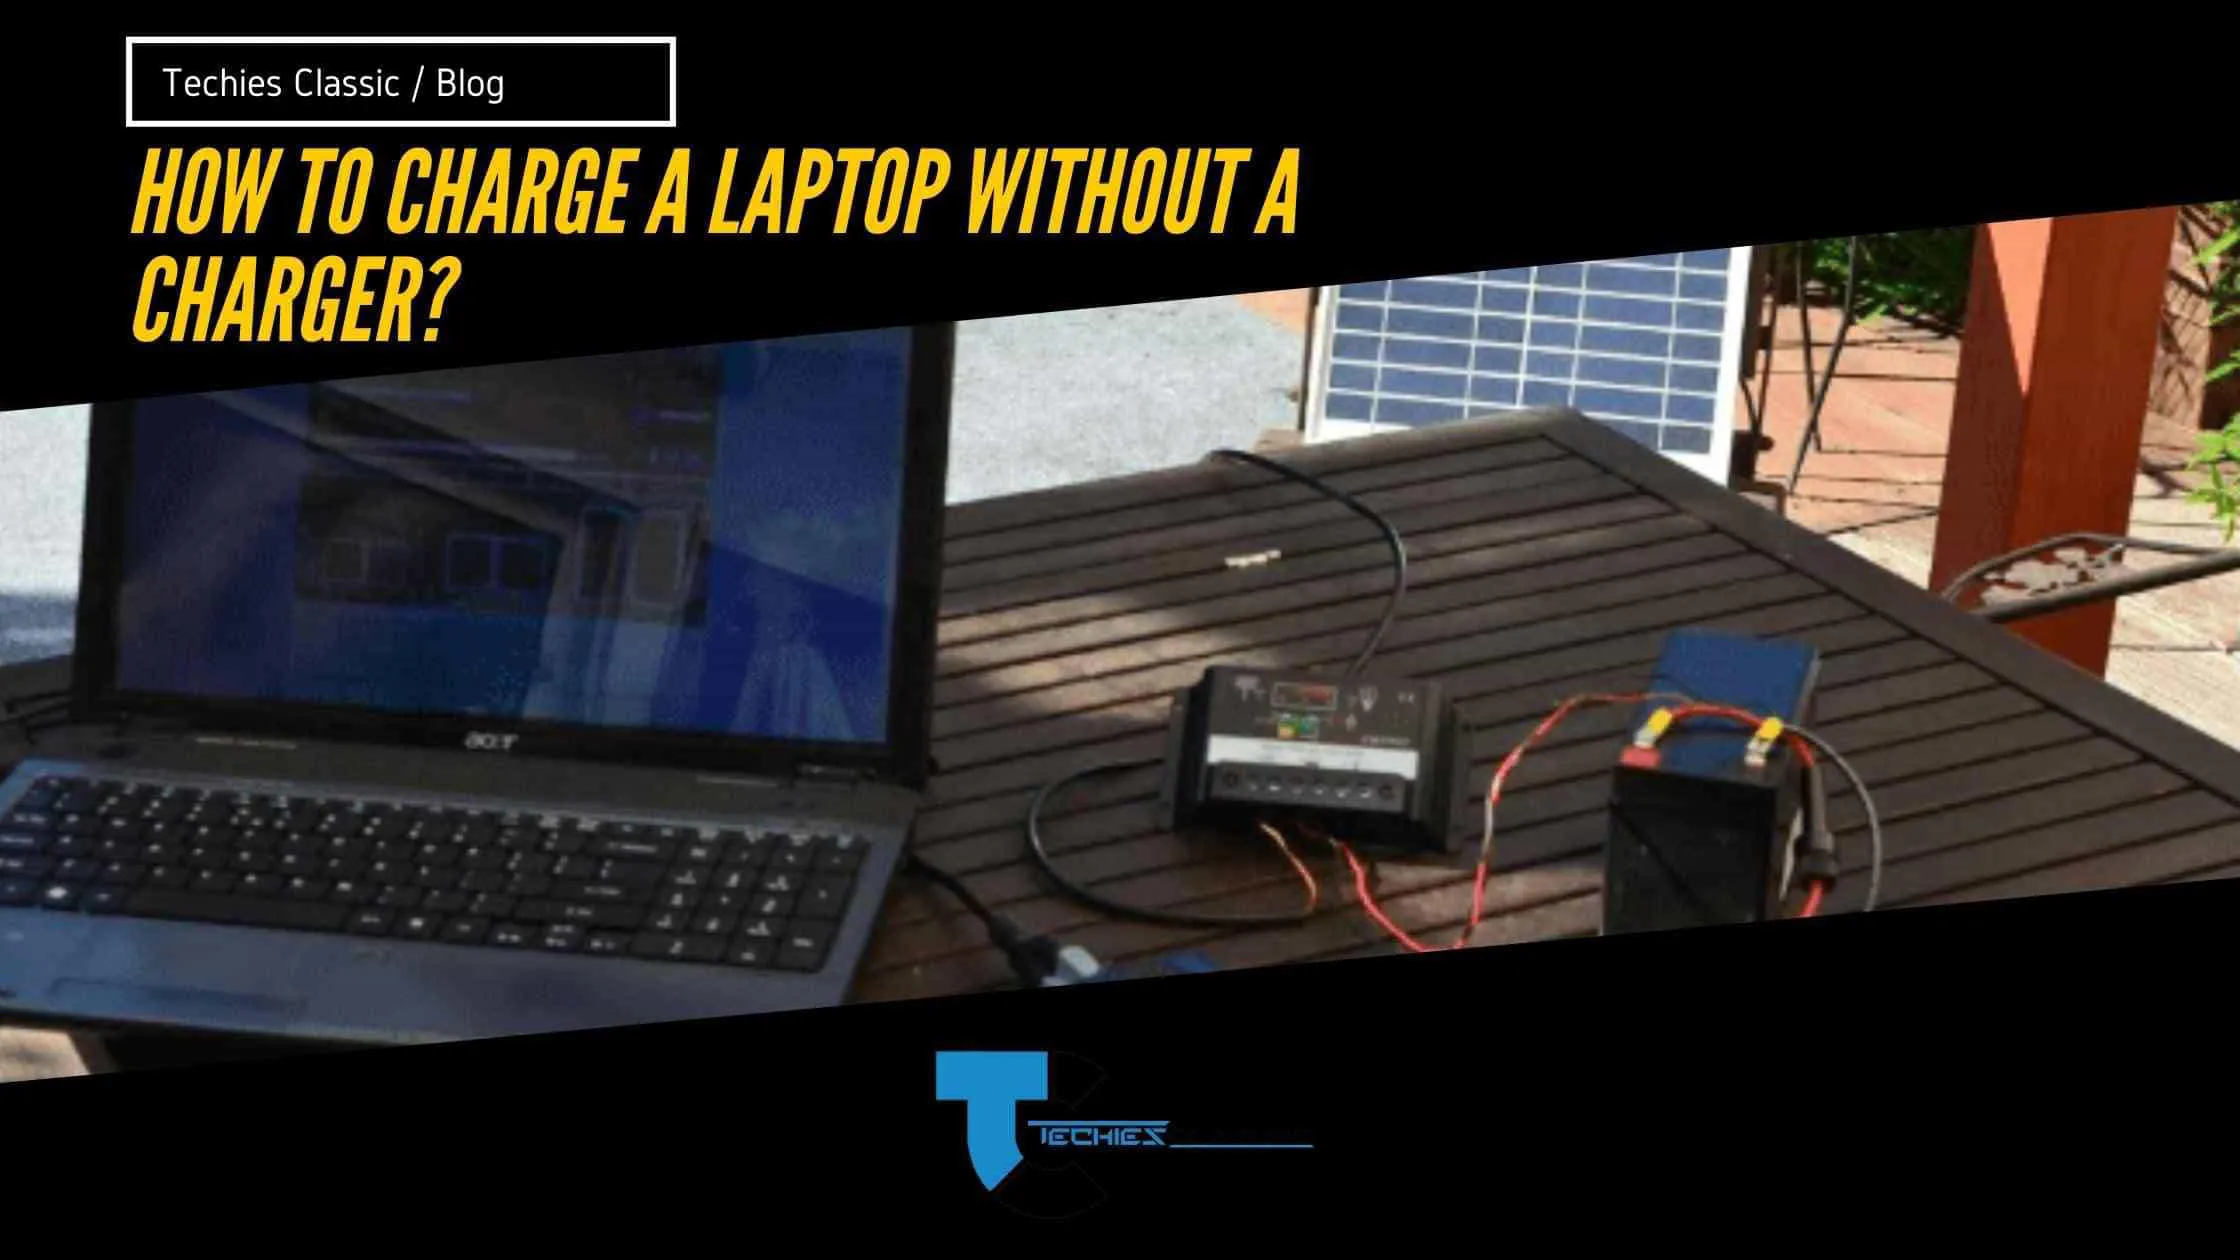 How to charge a laptop without a charger?